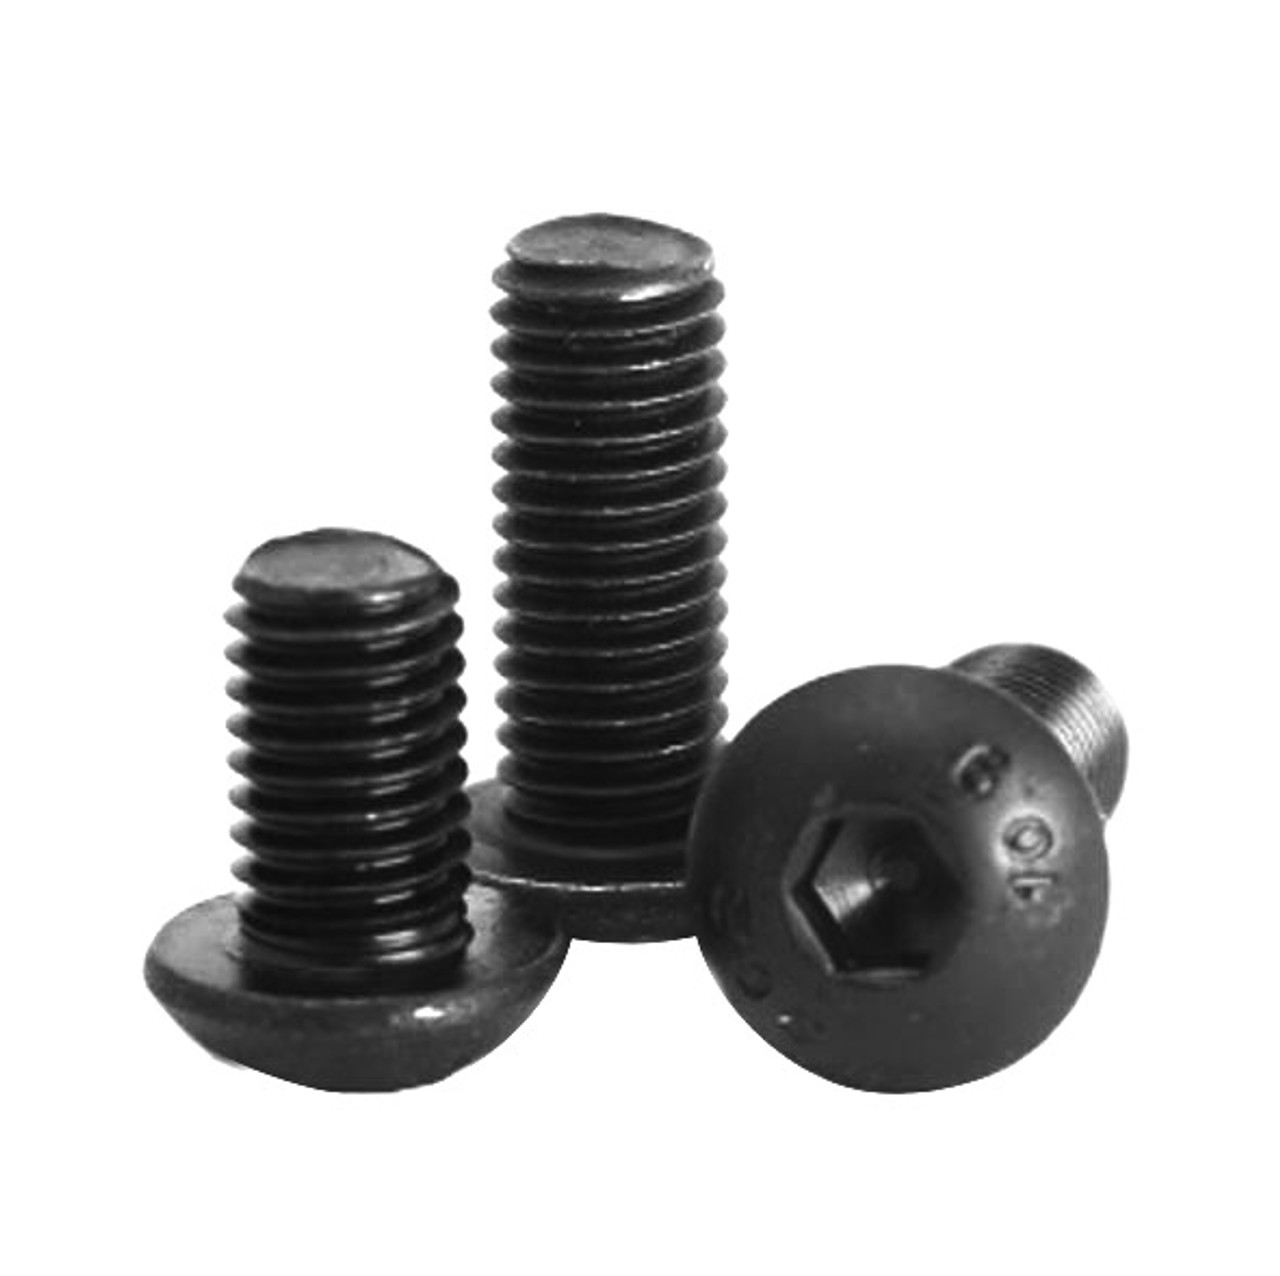 Fasteners for the Classroom